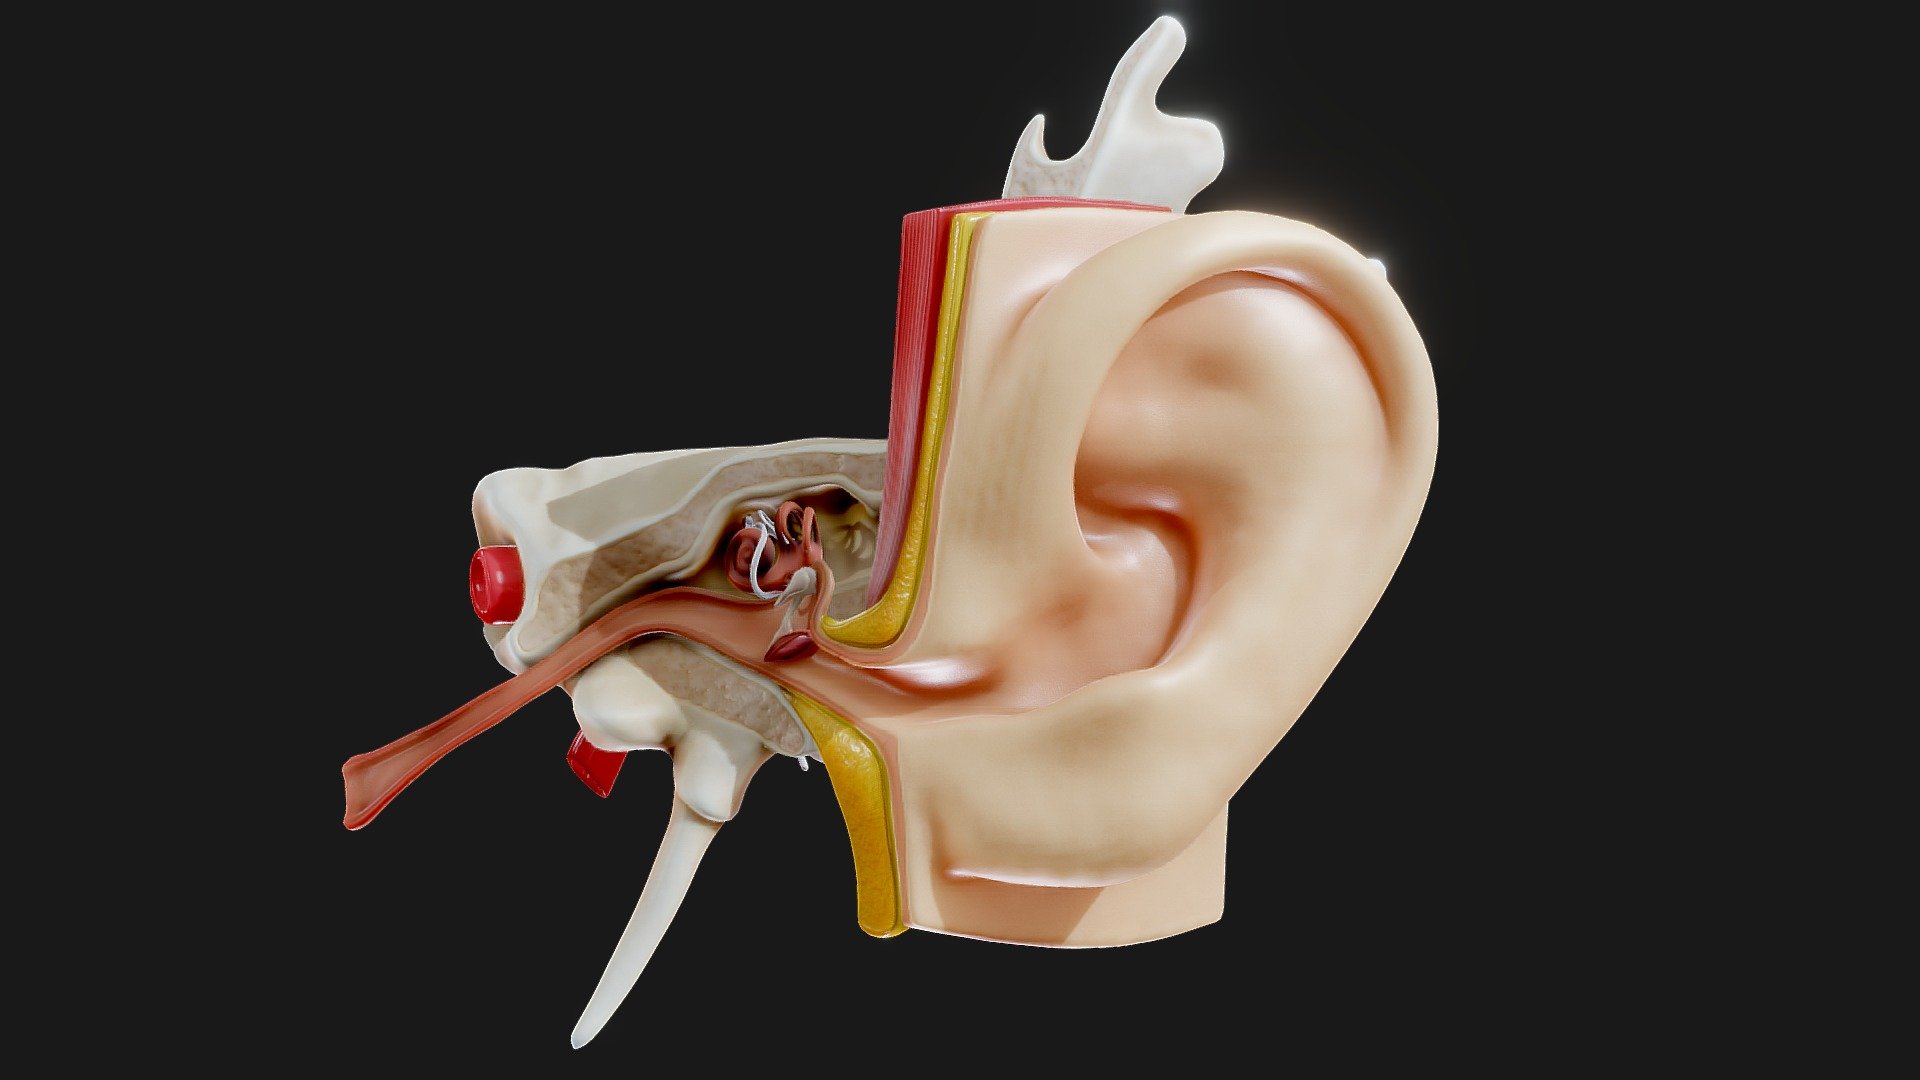 Originally modeled in Cinema 4D R 23 + Zbrush 2021



Maps for Ear Structure Anatomy 





BaseColor




Metallic




Roughness




Normal




Ambient Occlusion





SCALE:





Model at world center and real scale:

Metric in centimeter

1 unit = 1 centimeter





Texture resolution 4096x4096

Texture format PNG



Poly Count :

Polygon Count - 167028

Vertex Count - 83518

No N-Gons - Ear Anatomy Structure Open - Buy Royalty Free 3D model by zames1992 3d model